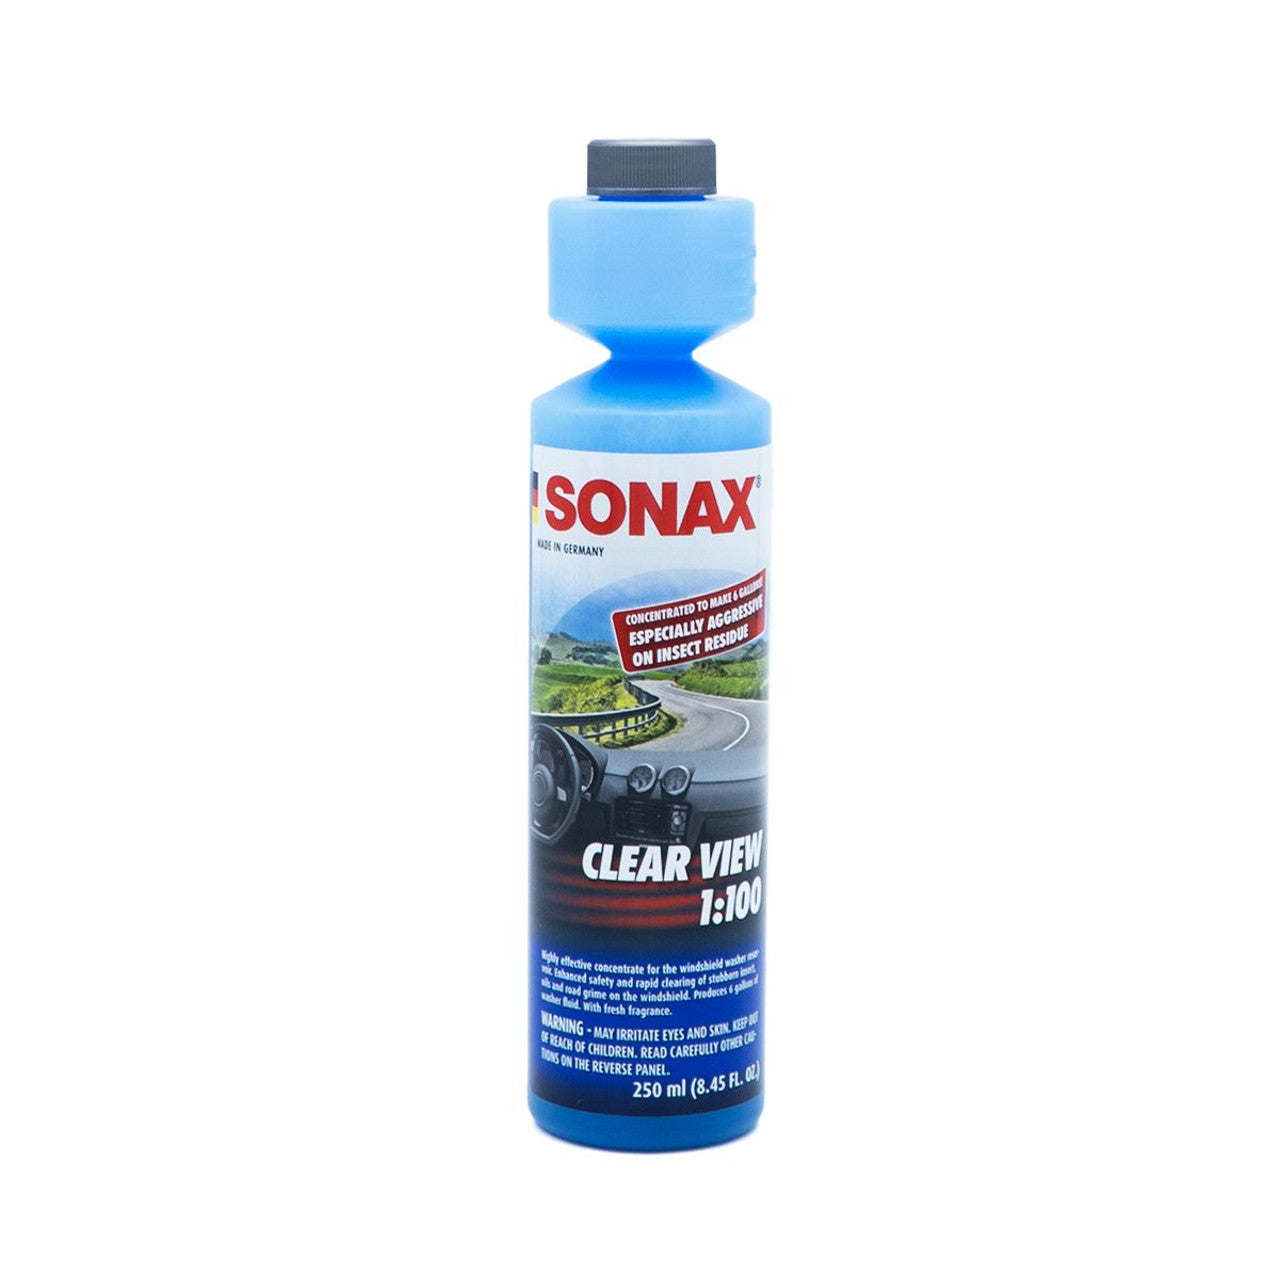 Sonax Clear View